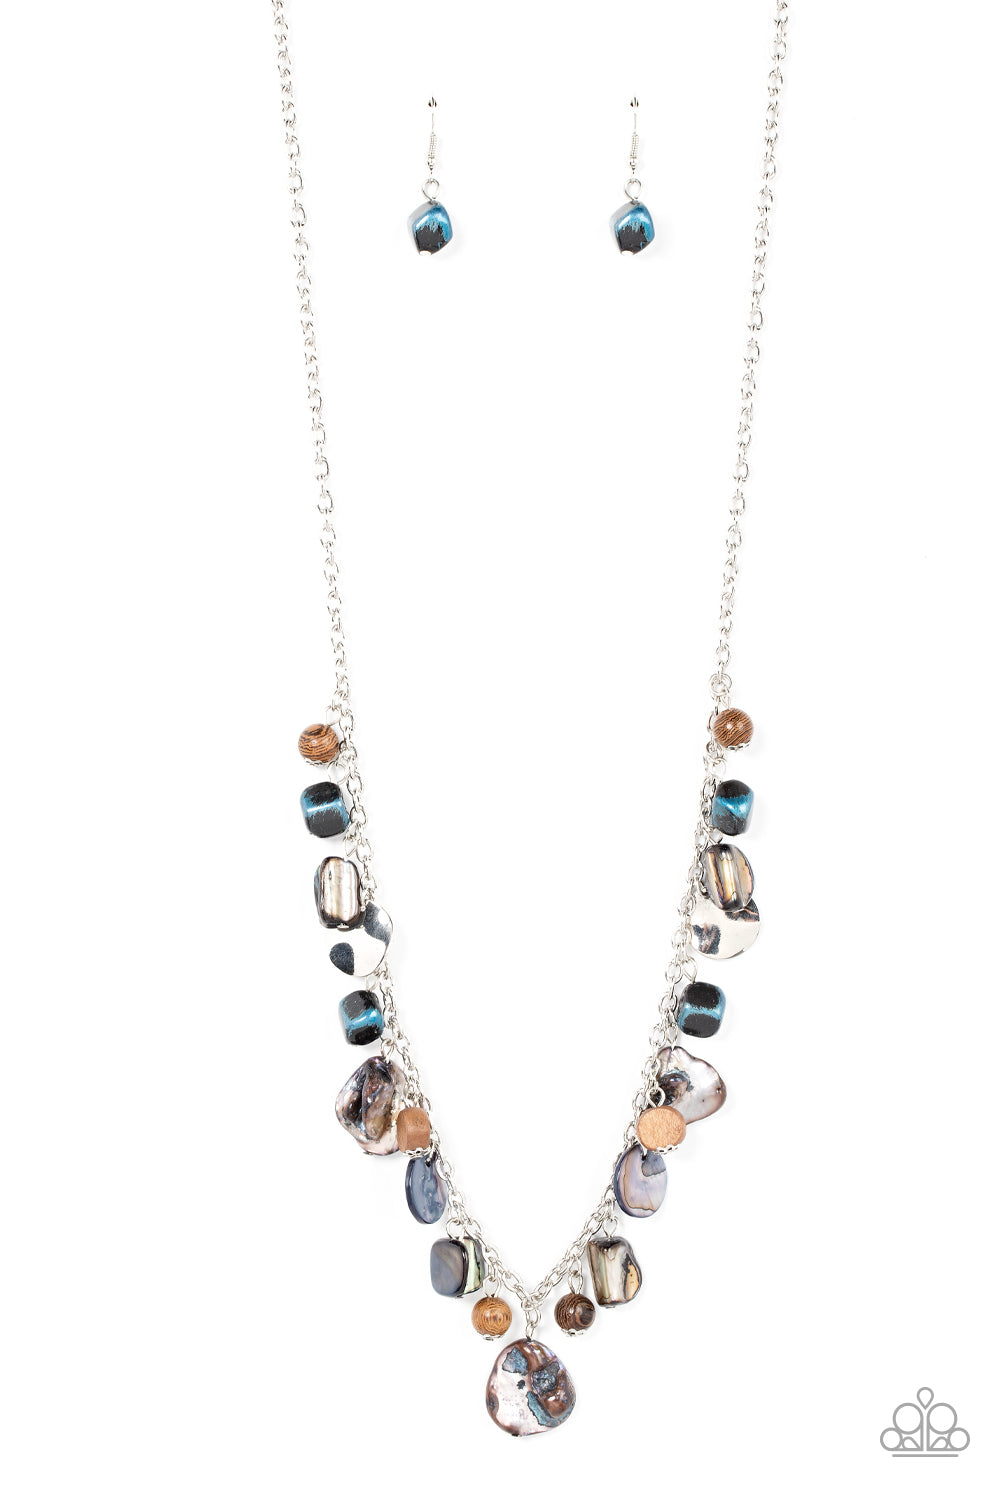 Caribbean Charisma - Blue and Silver Necklace - Paparazzi Accessories - A mismatched collection of warped silver discs, brown wooden beads, and iridescent shell-like rock accents dances from the bottom of a classic silver chain, creating a tropical sensation across the chest. Features an adjustable clasp closure. Sold as one individual necklace.